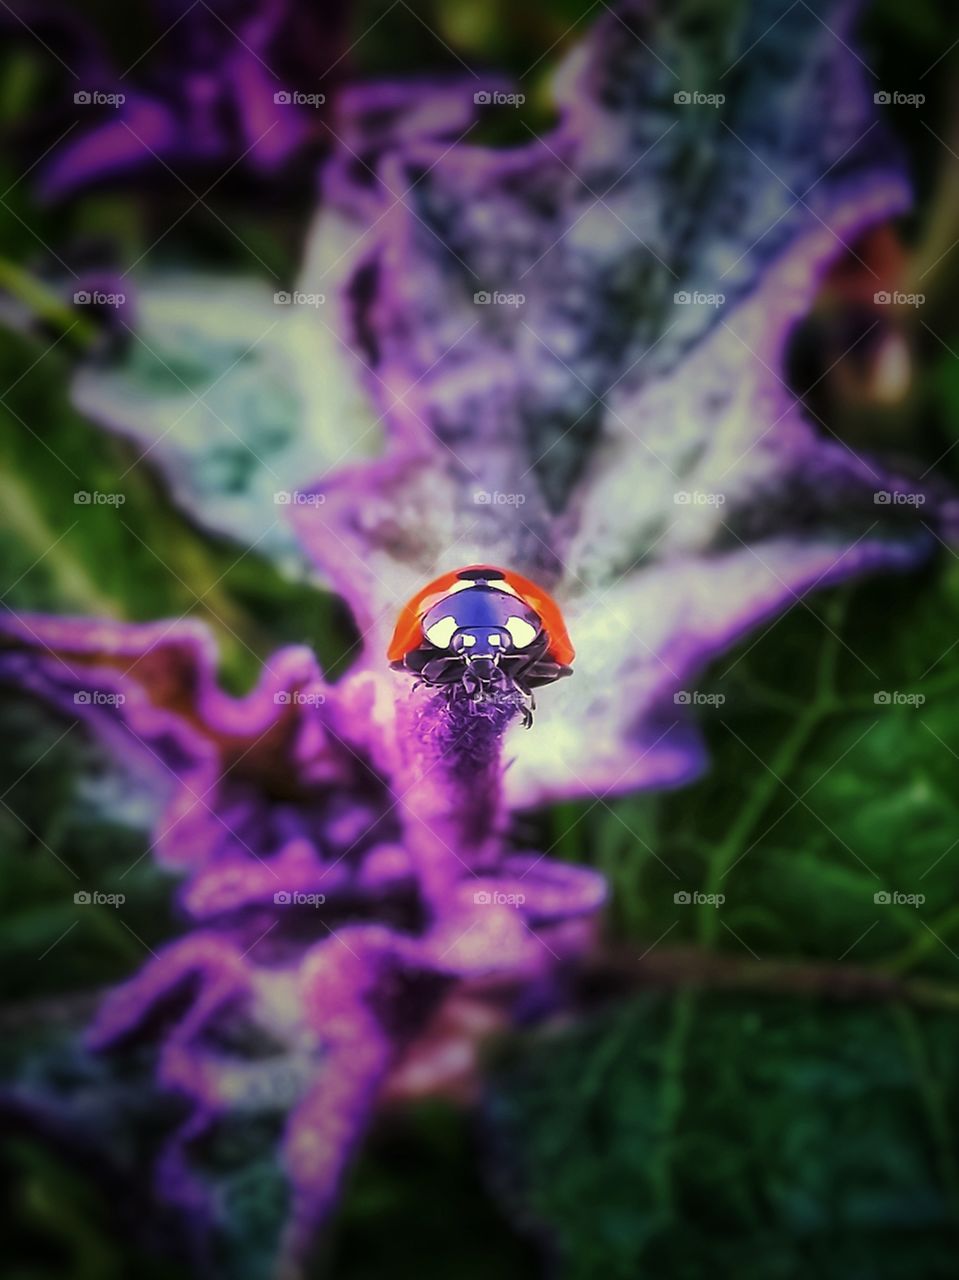 Color love an orange ladybug sitting on a fuzzy green and purple weed